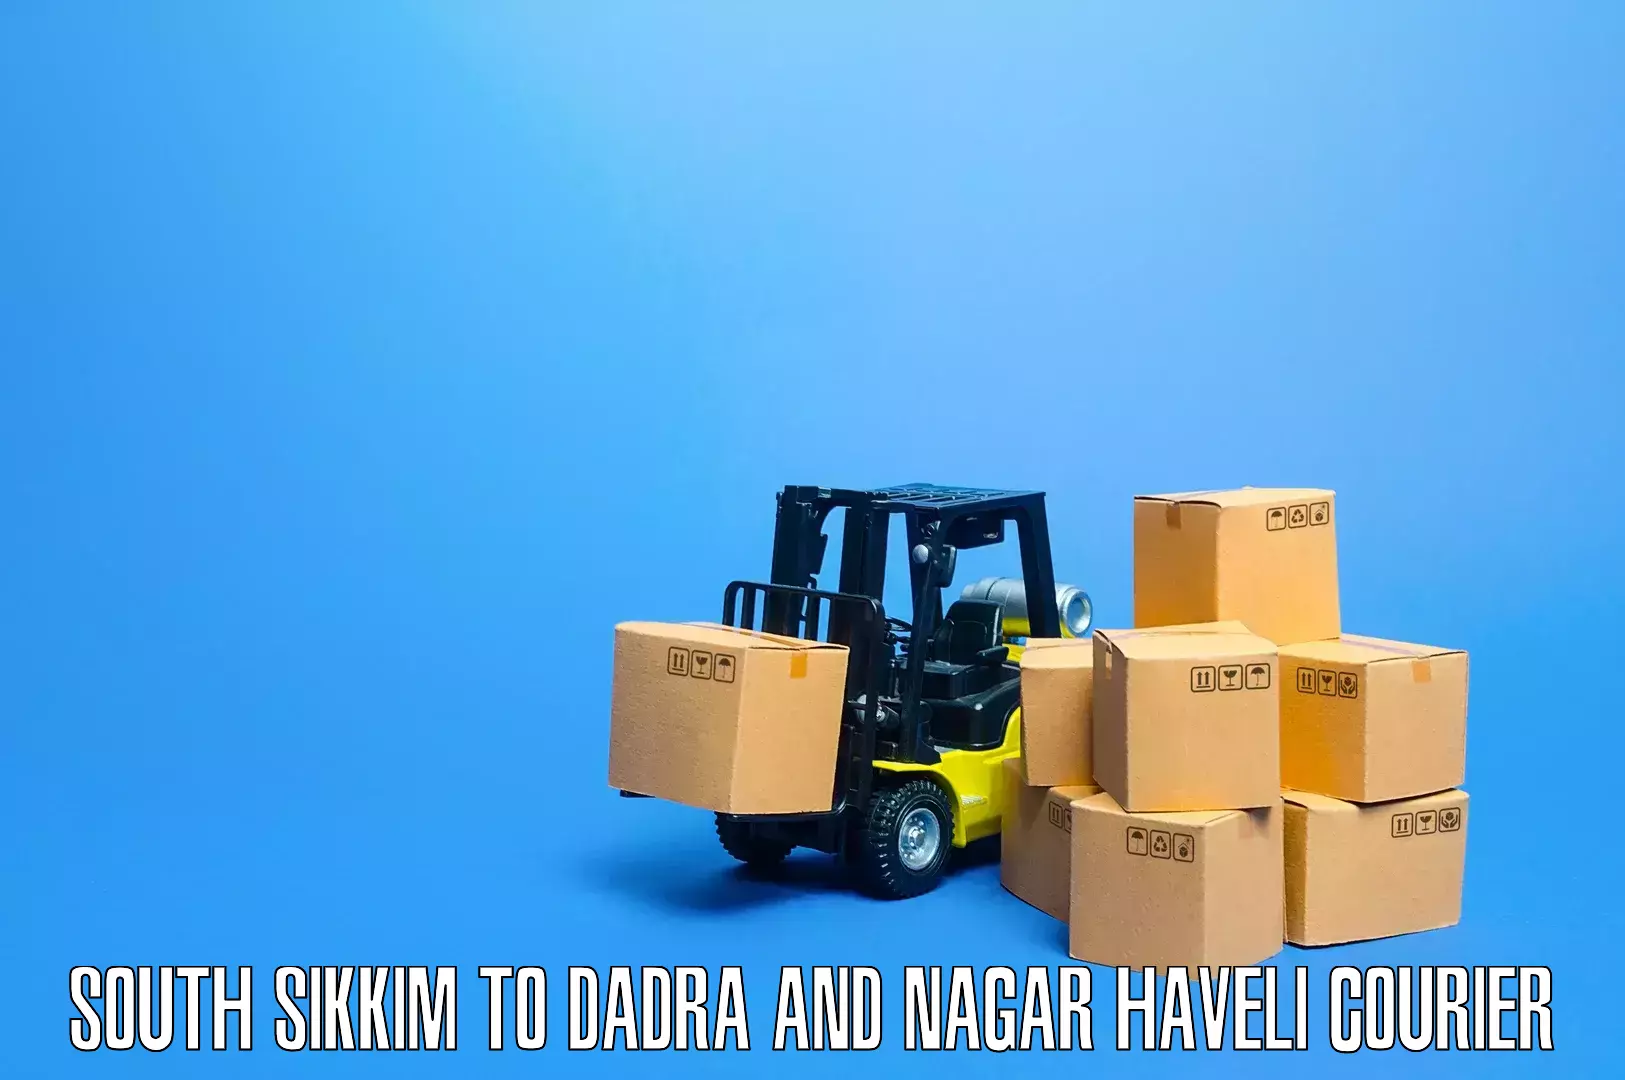 Quality relocation assistance South Sikkim to Dadra and Nagar Haveli